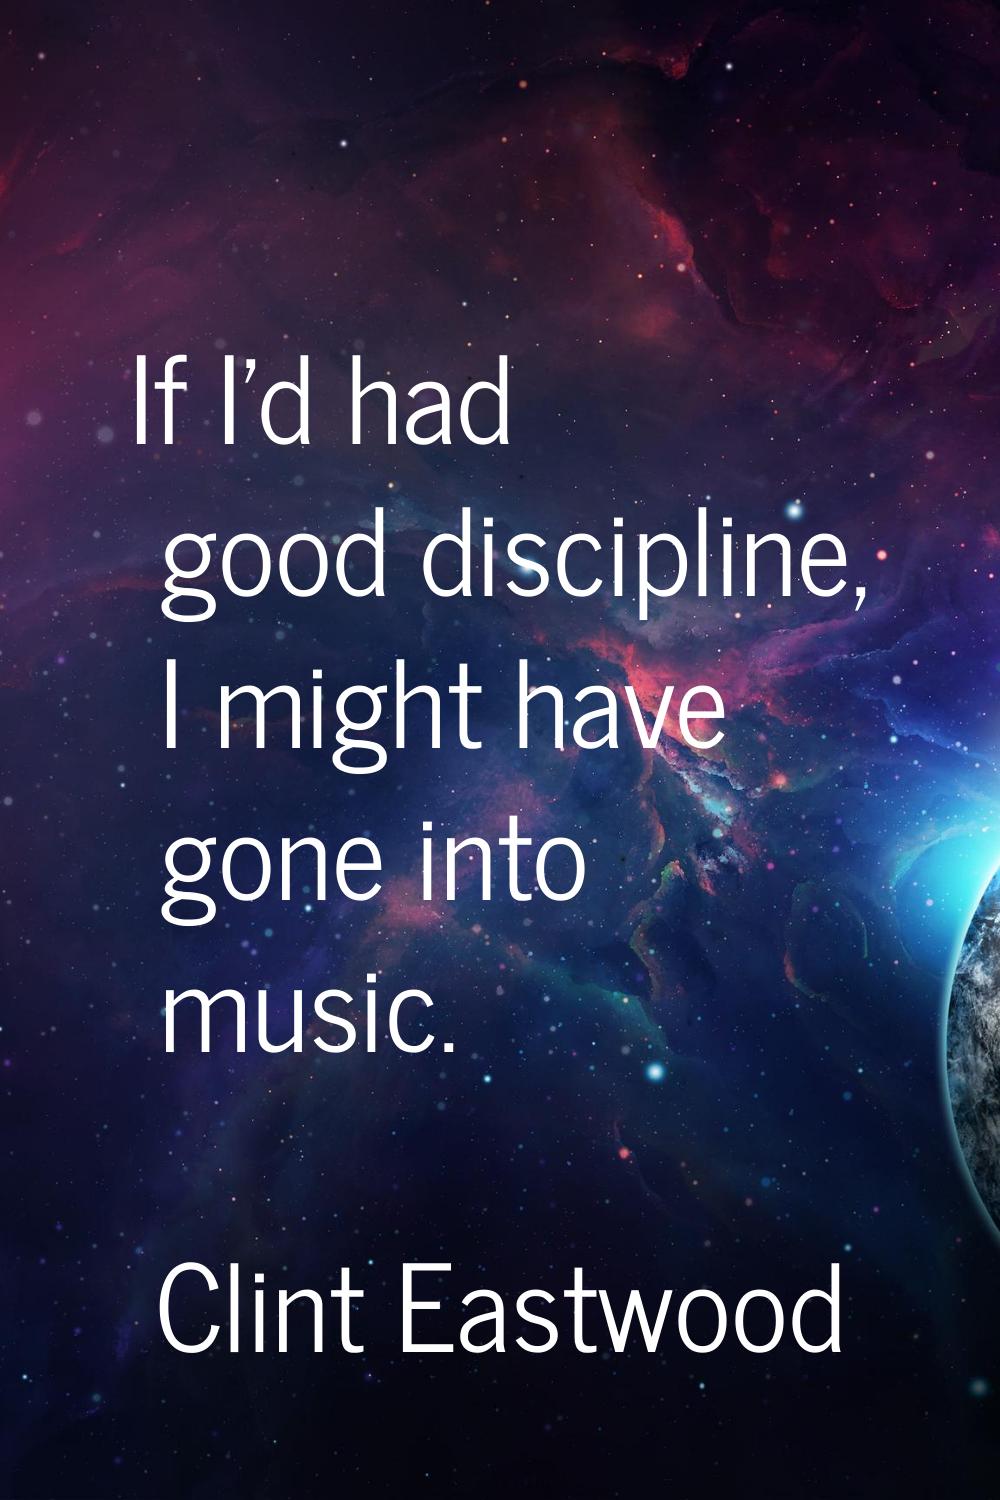 If I'd had good discipline, I might have gone into music.